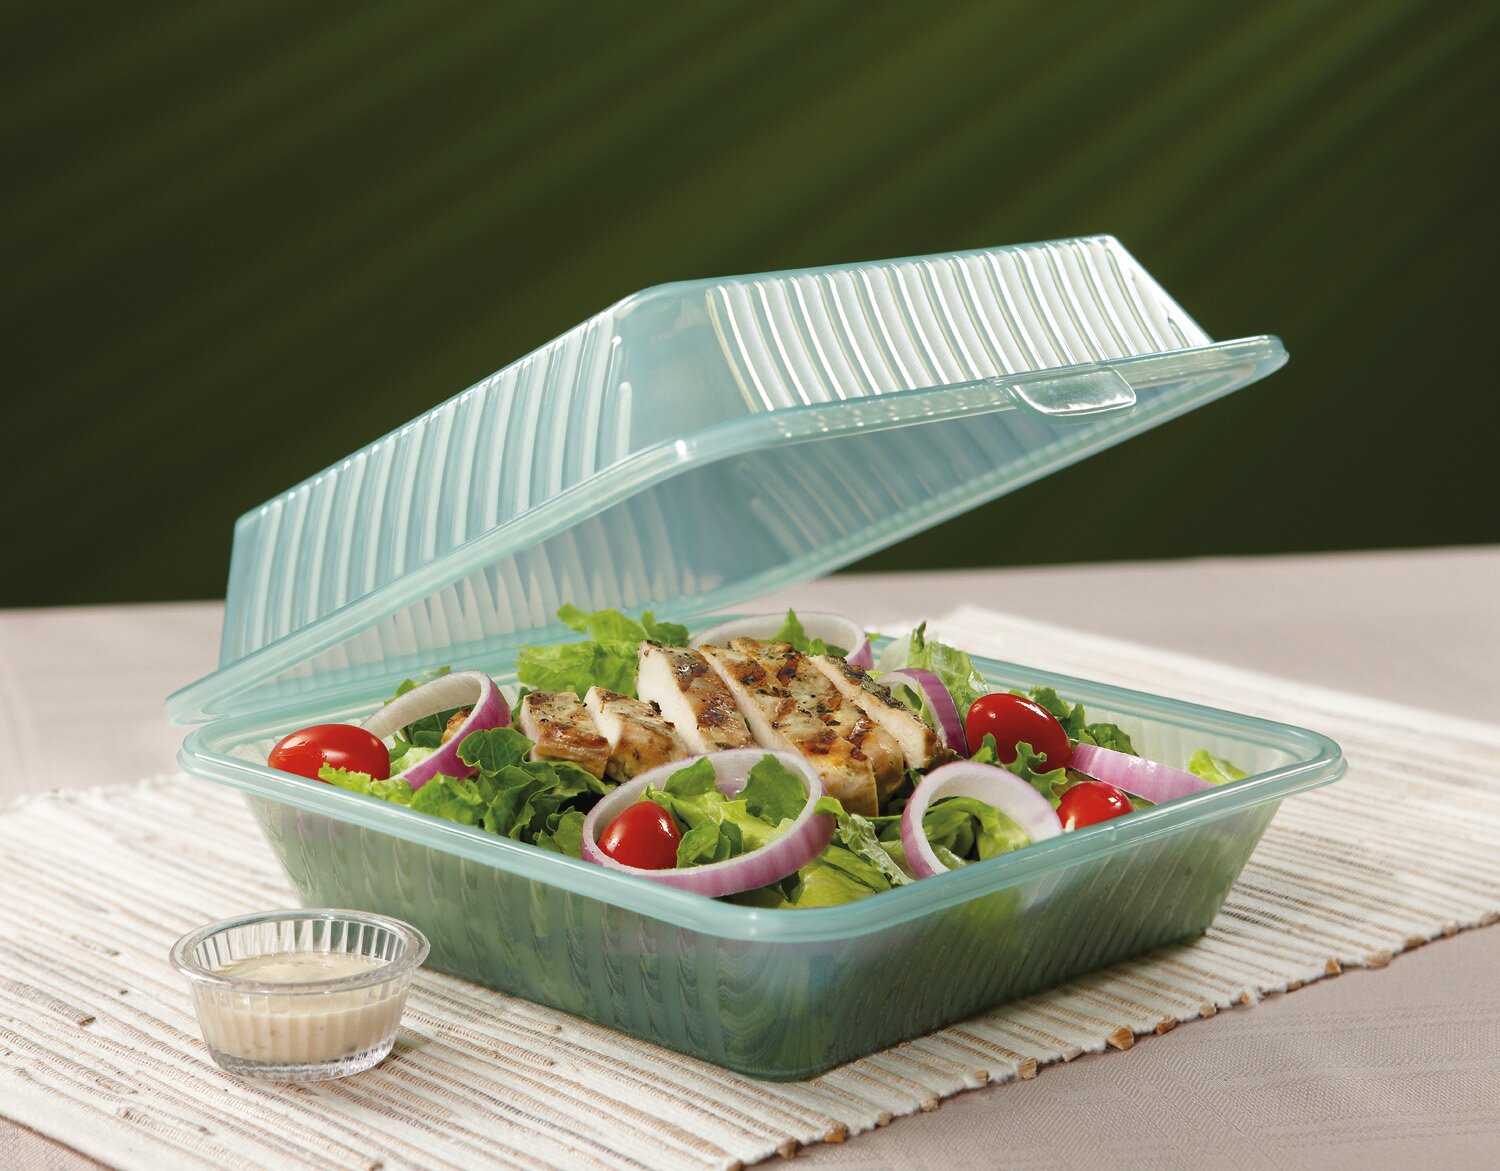 The latest sustainable takeaway packaging and ways of dealing with waste food